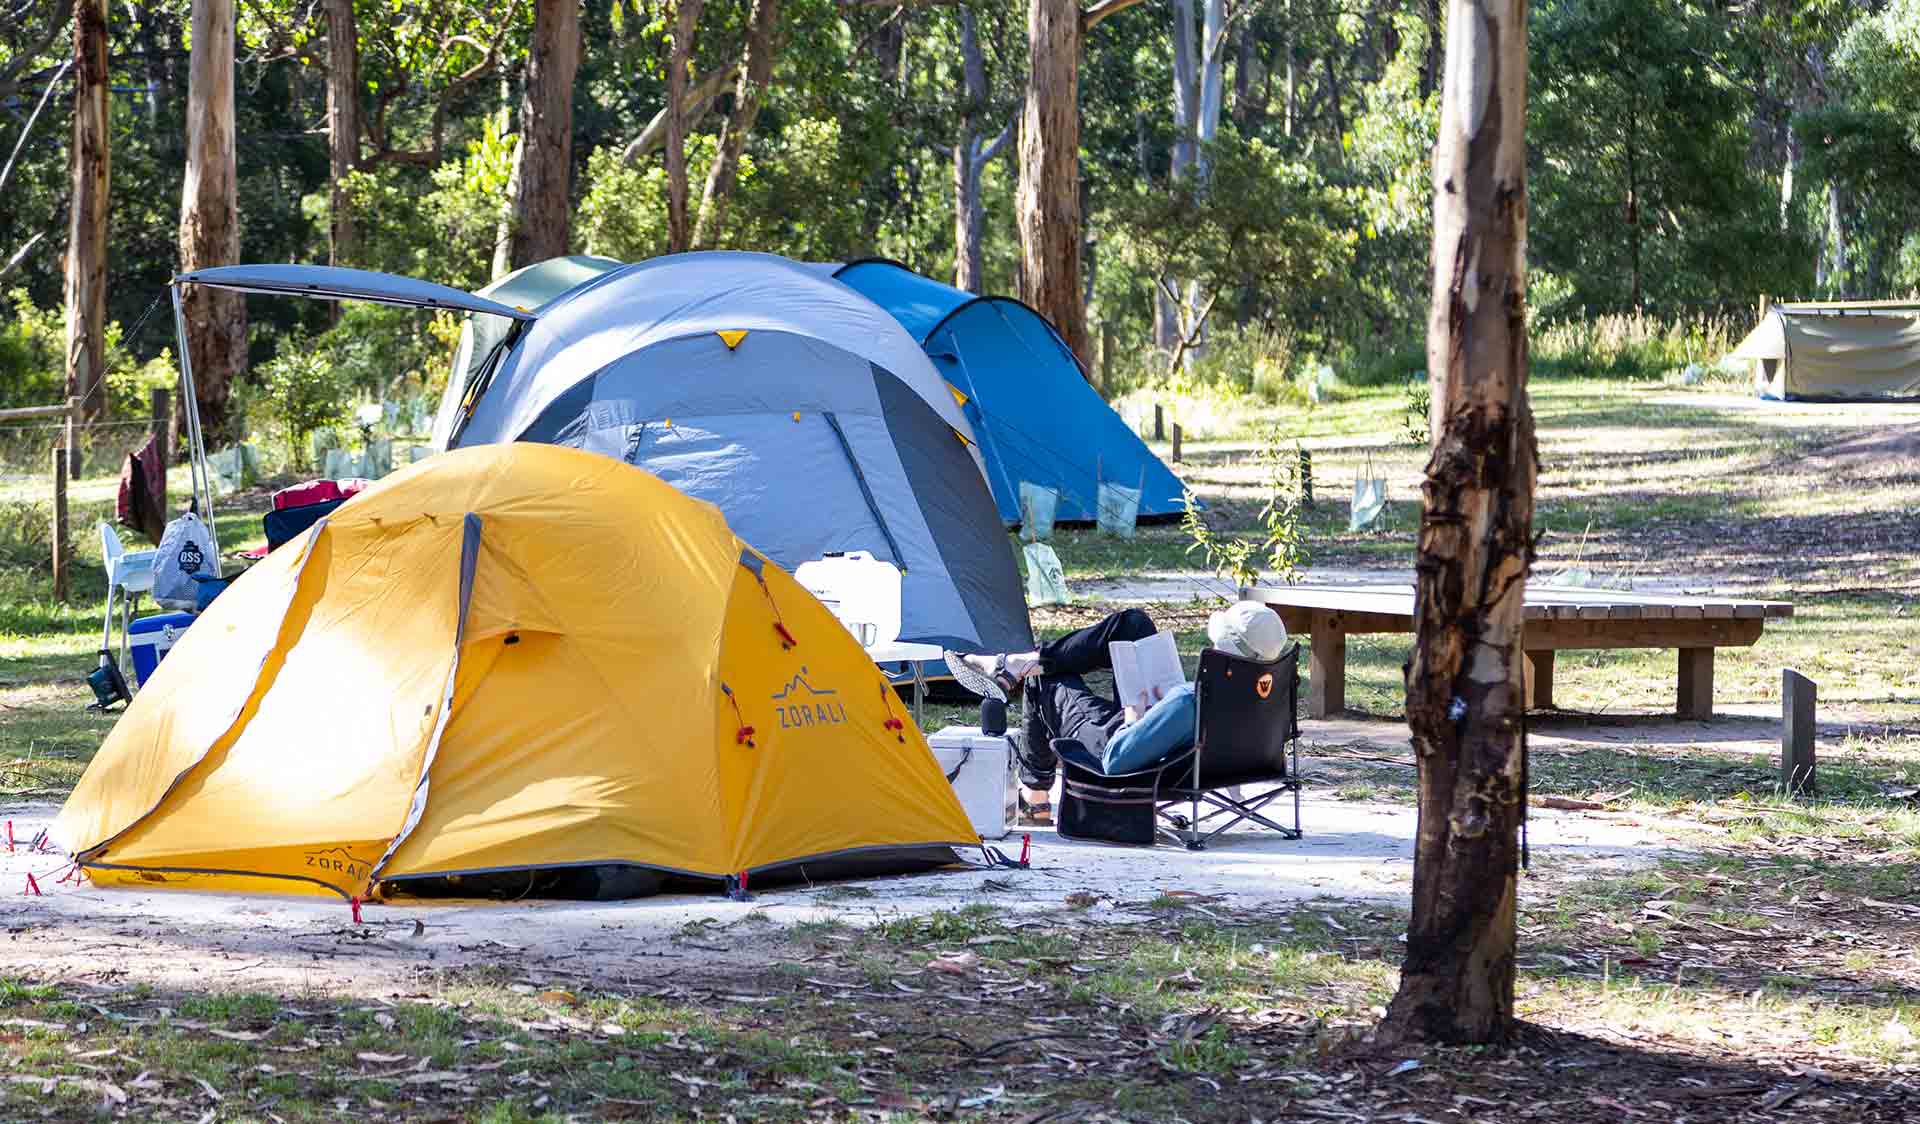 A man relaxes reading a book next to his tent at Allenvale Mill Campground in the Great Otway National Park